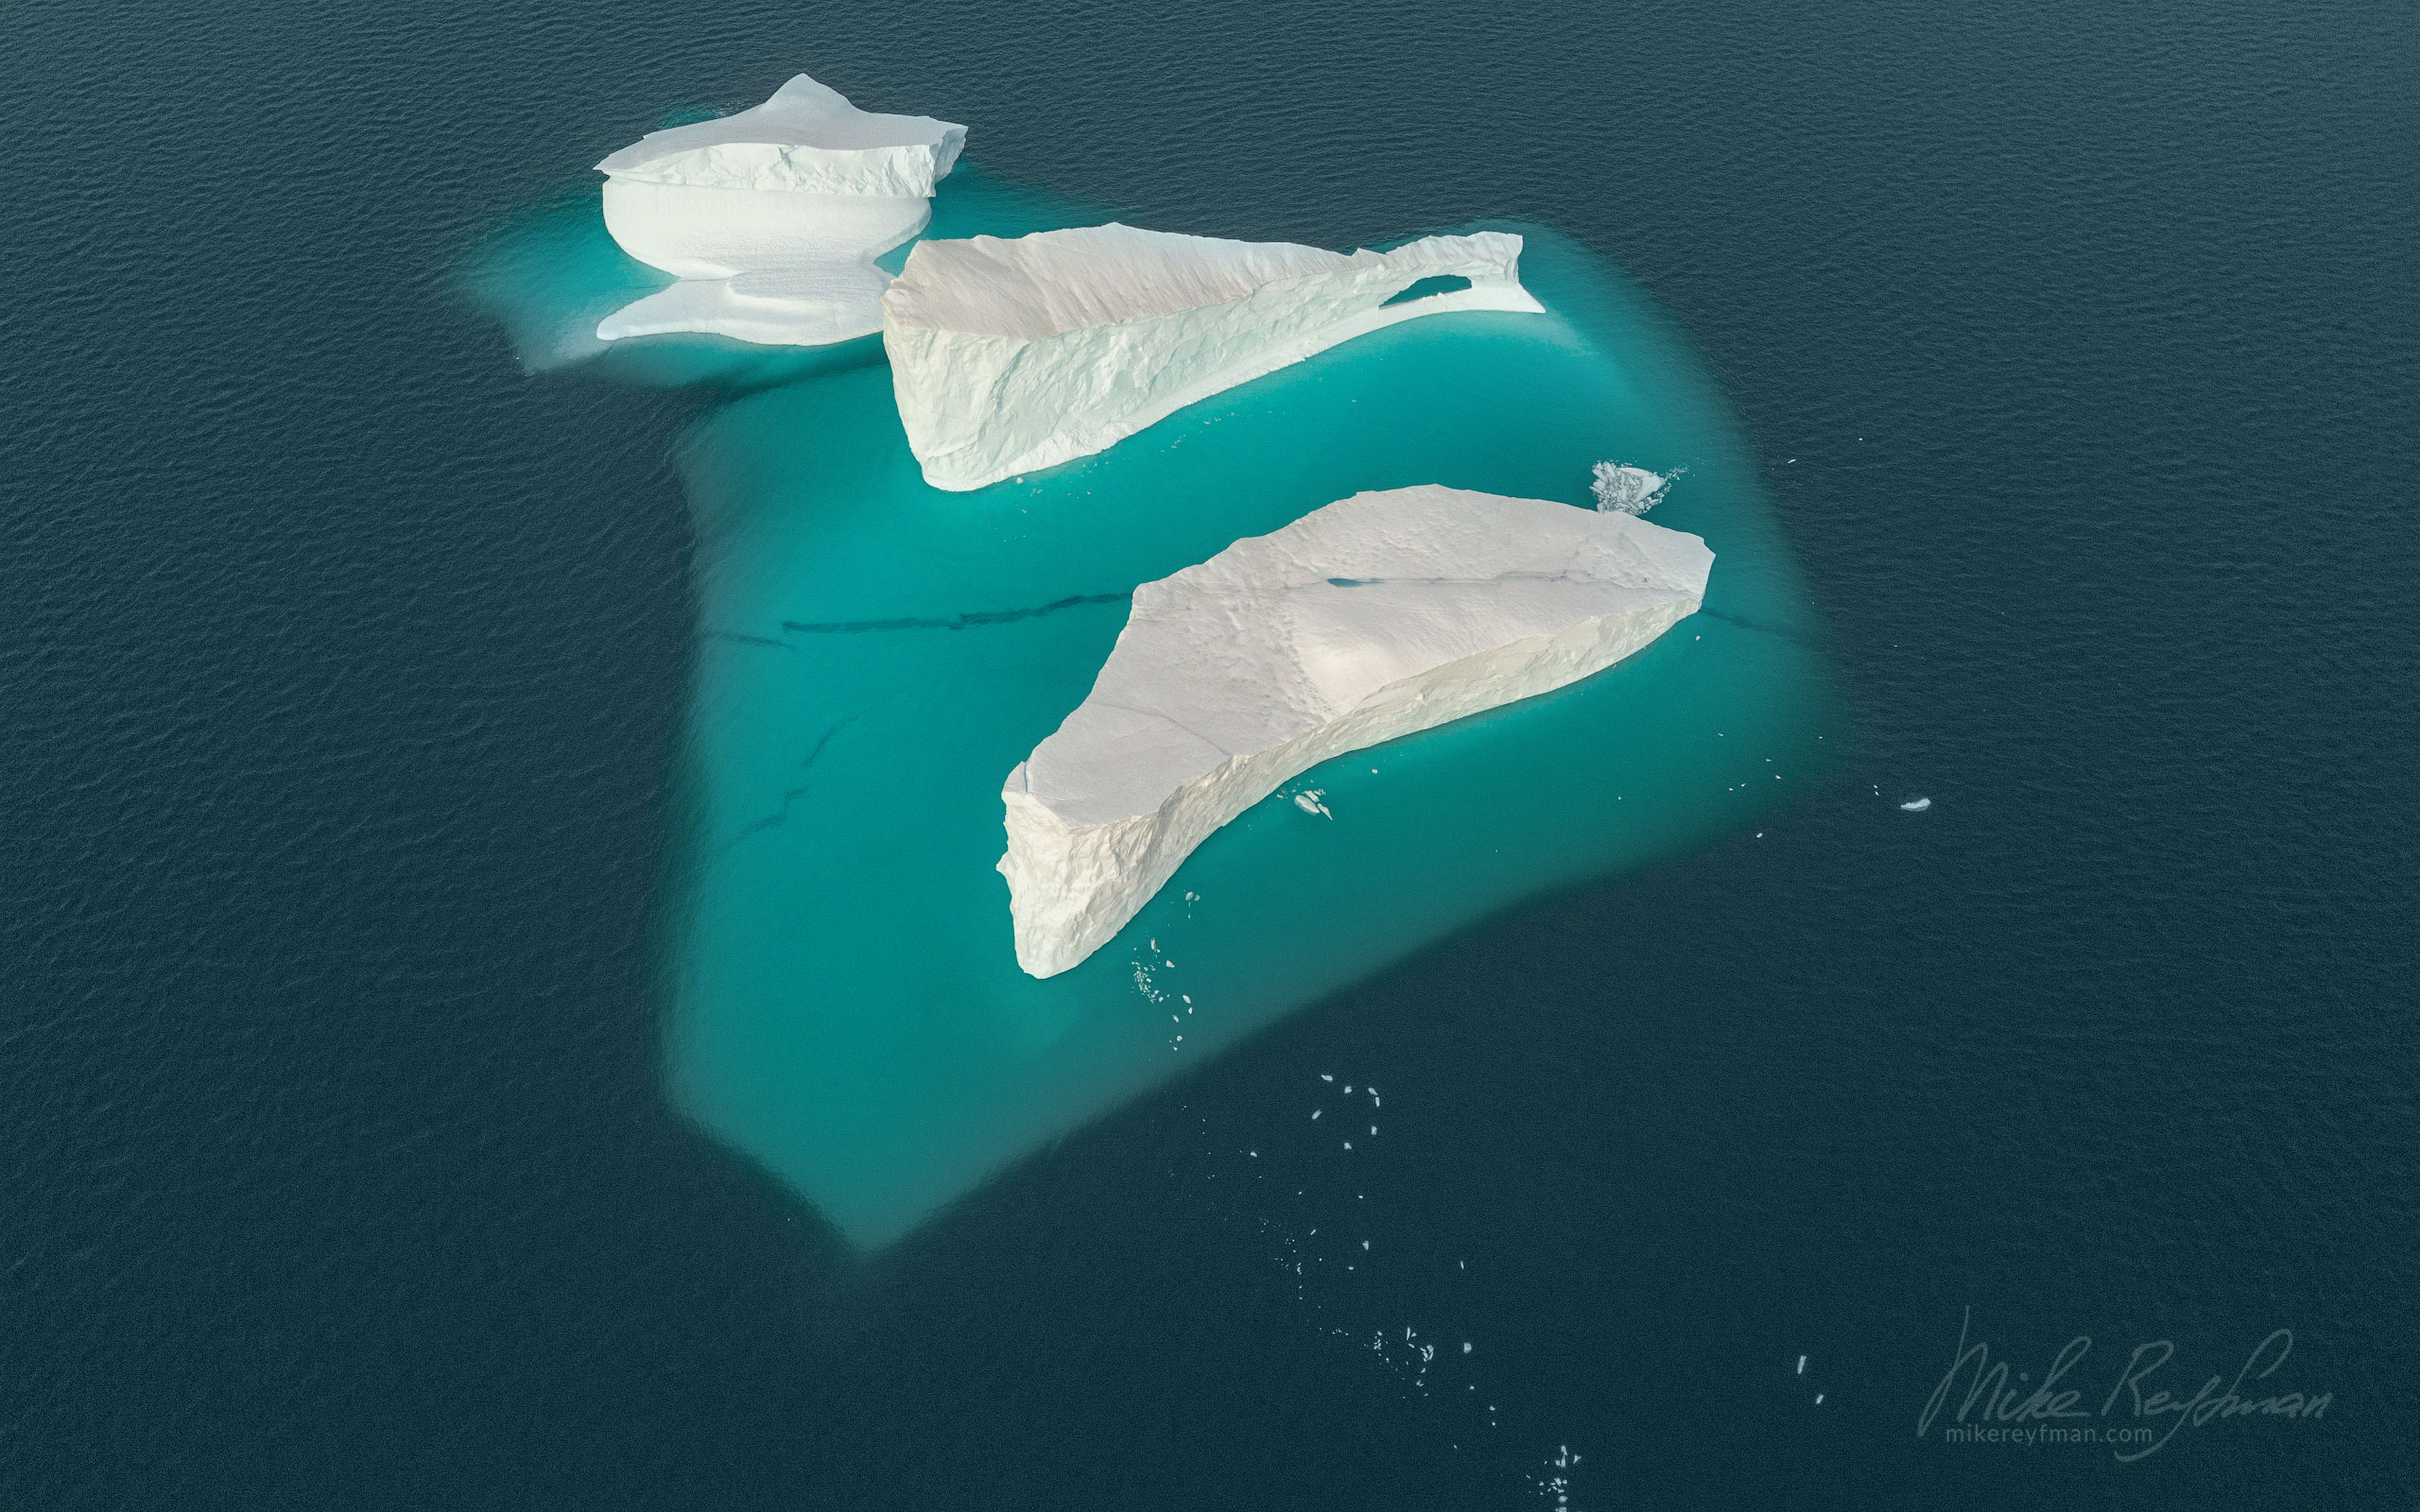 Iceberg in Scoresby Sund. Greenland. Aerial. 067-GR-SC_DJI_0275 - The Scoresby Sund fjord system and the settlement of Ittoqqortoormiit. East Greenland. - Mike Reyfman Photography